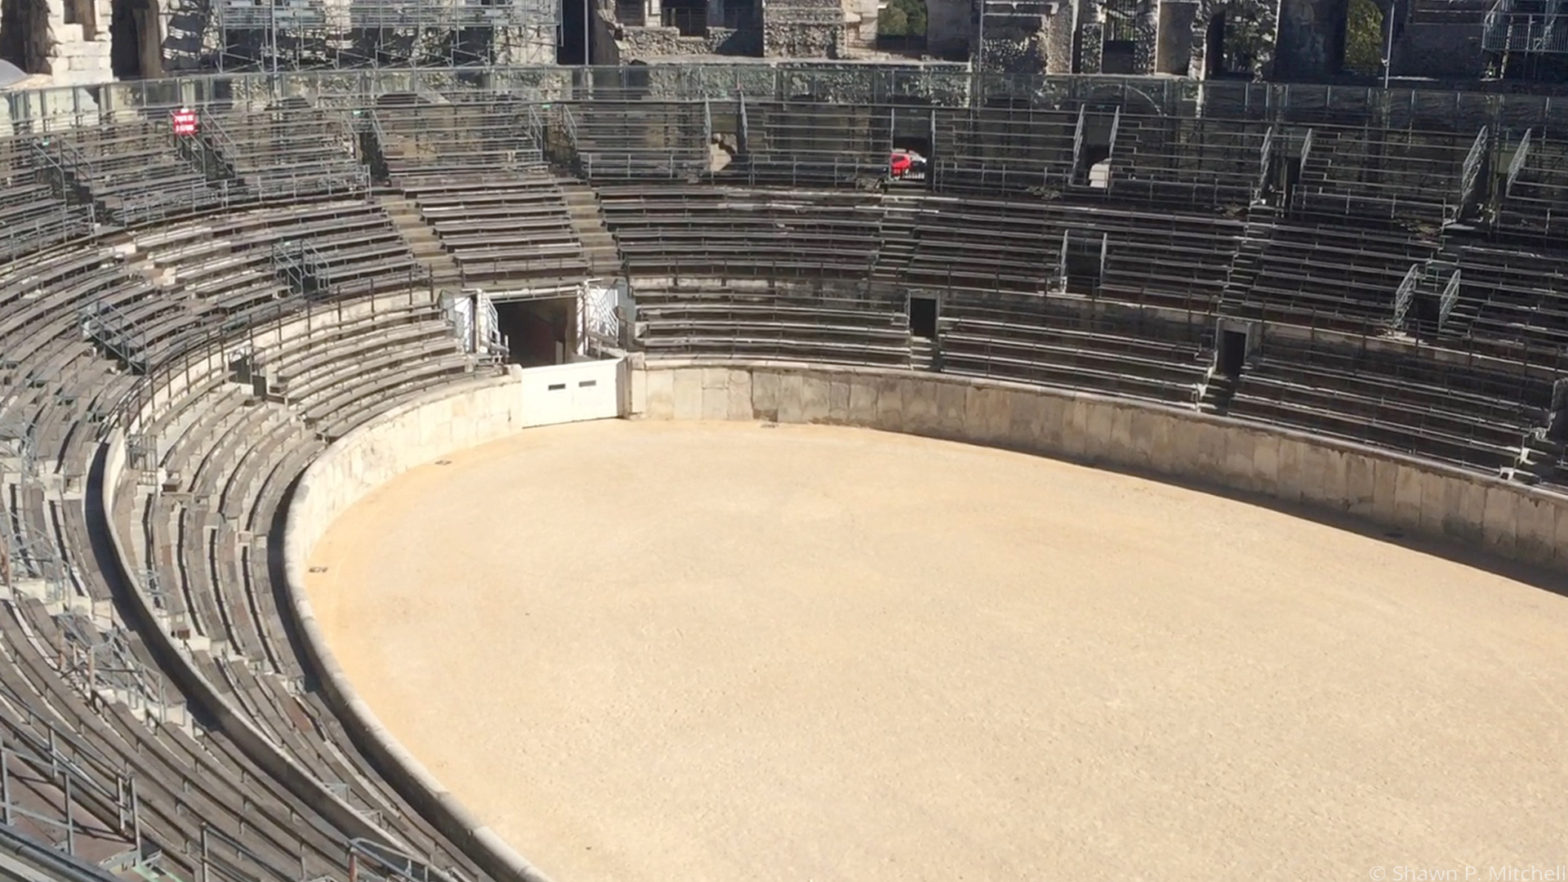 An overview view of the Roman arena in Nîmes, France.